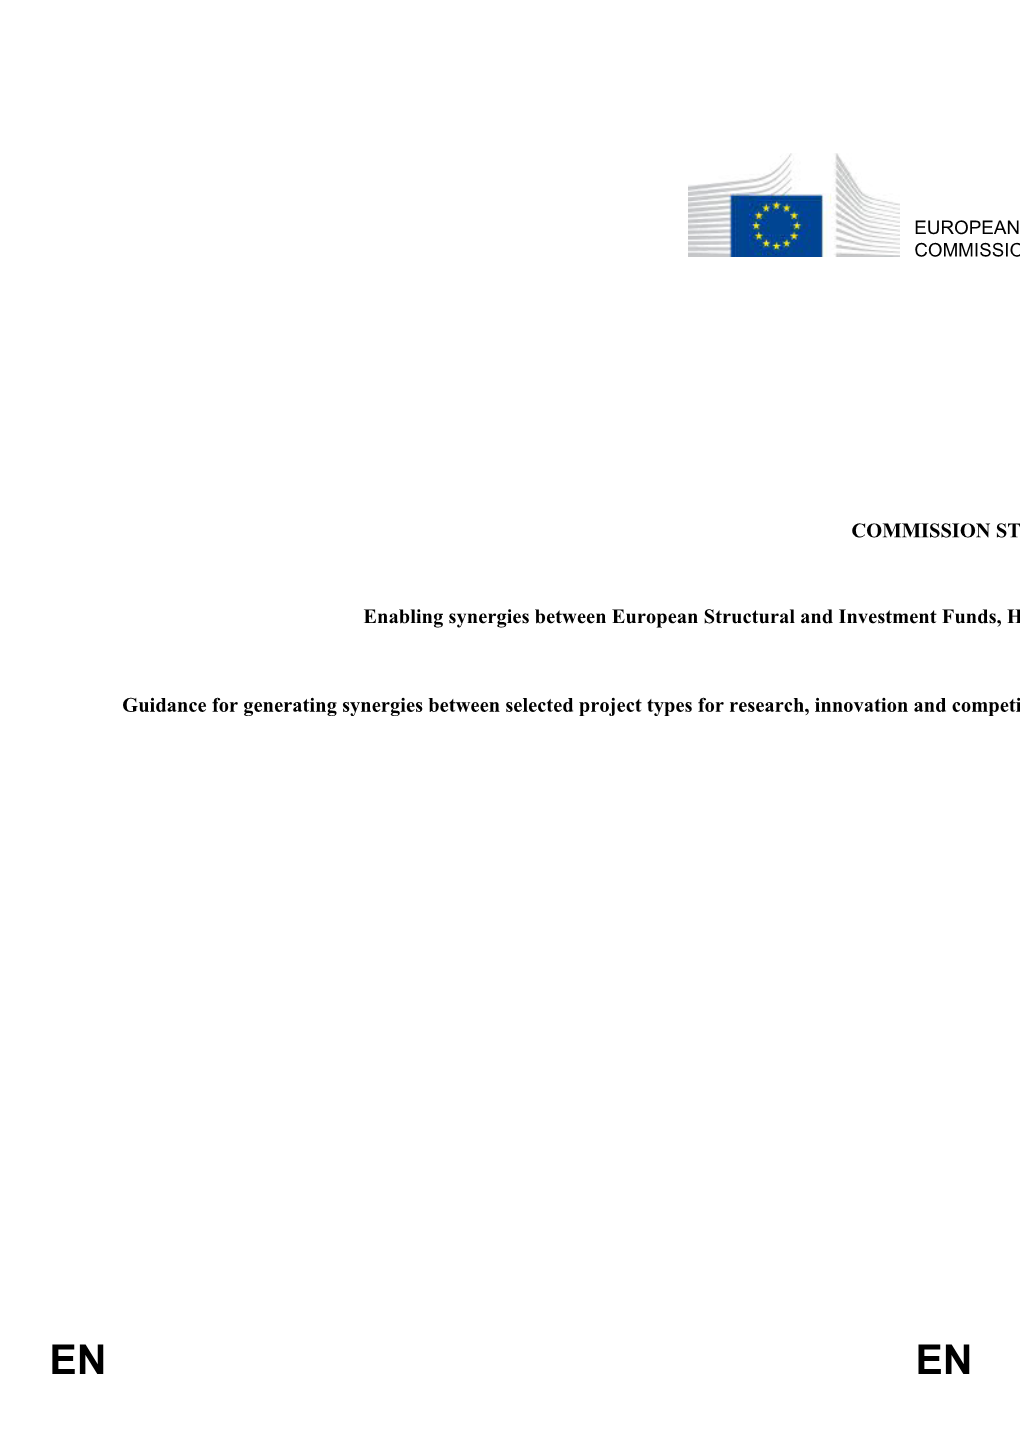 To SWD(2014) Enabling Synergies Between European Structural and Investment Funds, Horizon